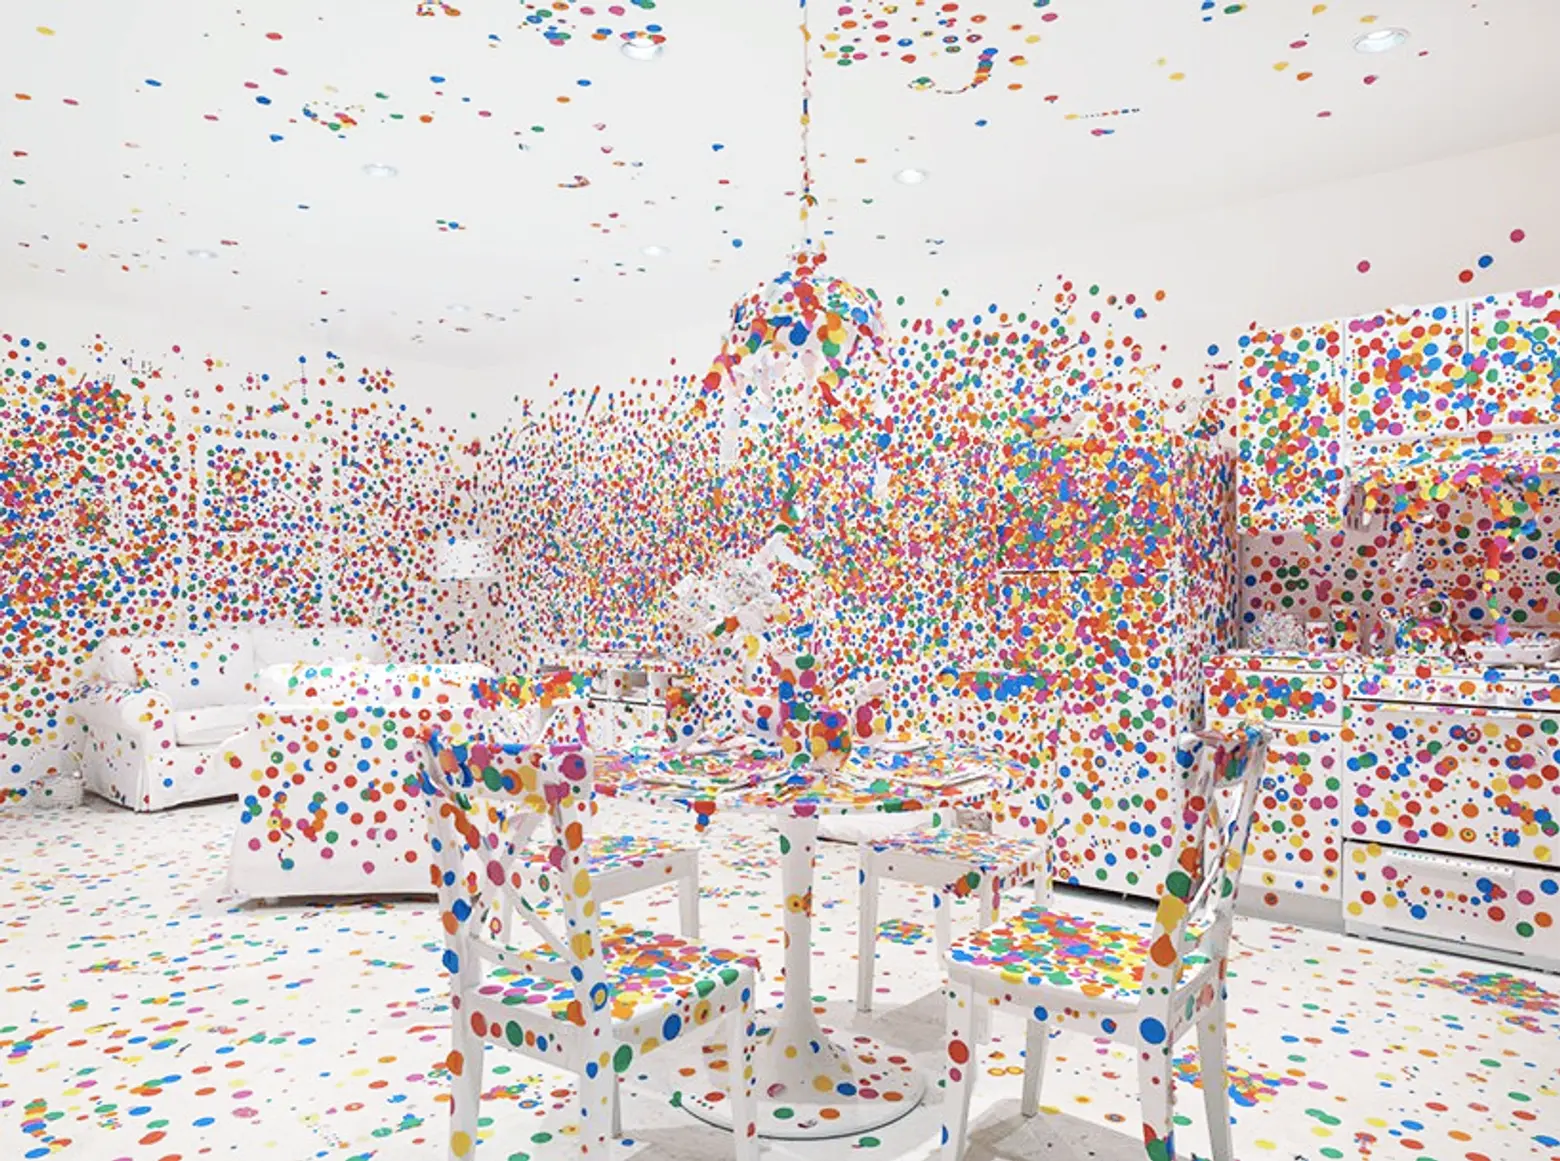 Yayoi Kusama’s Polka Dot-Covered ‘Obliteration Room’ Shows for the First Time in the U.S.